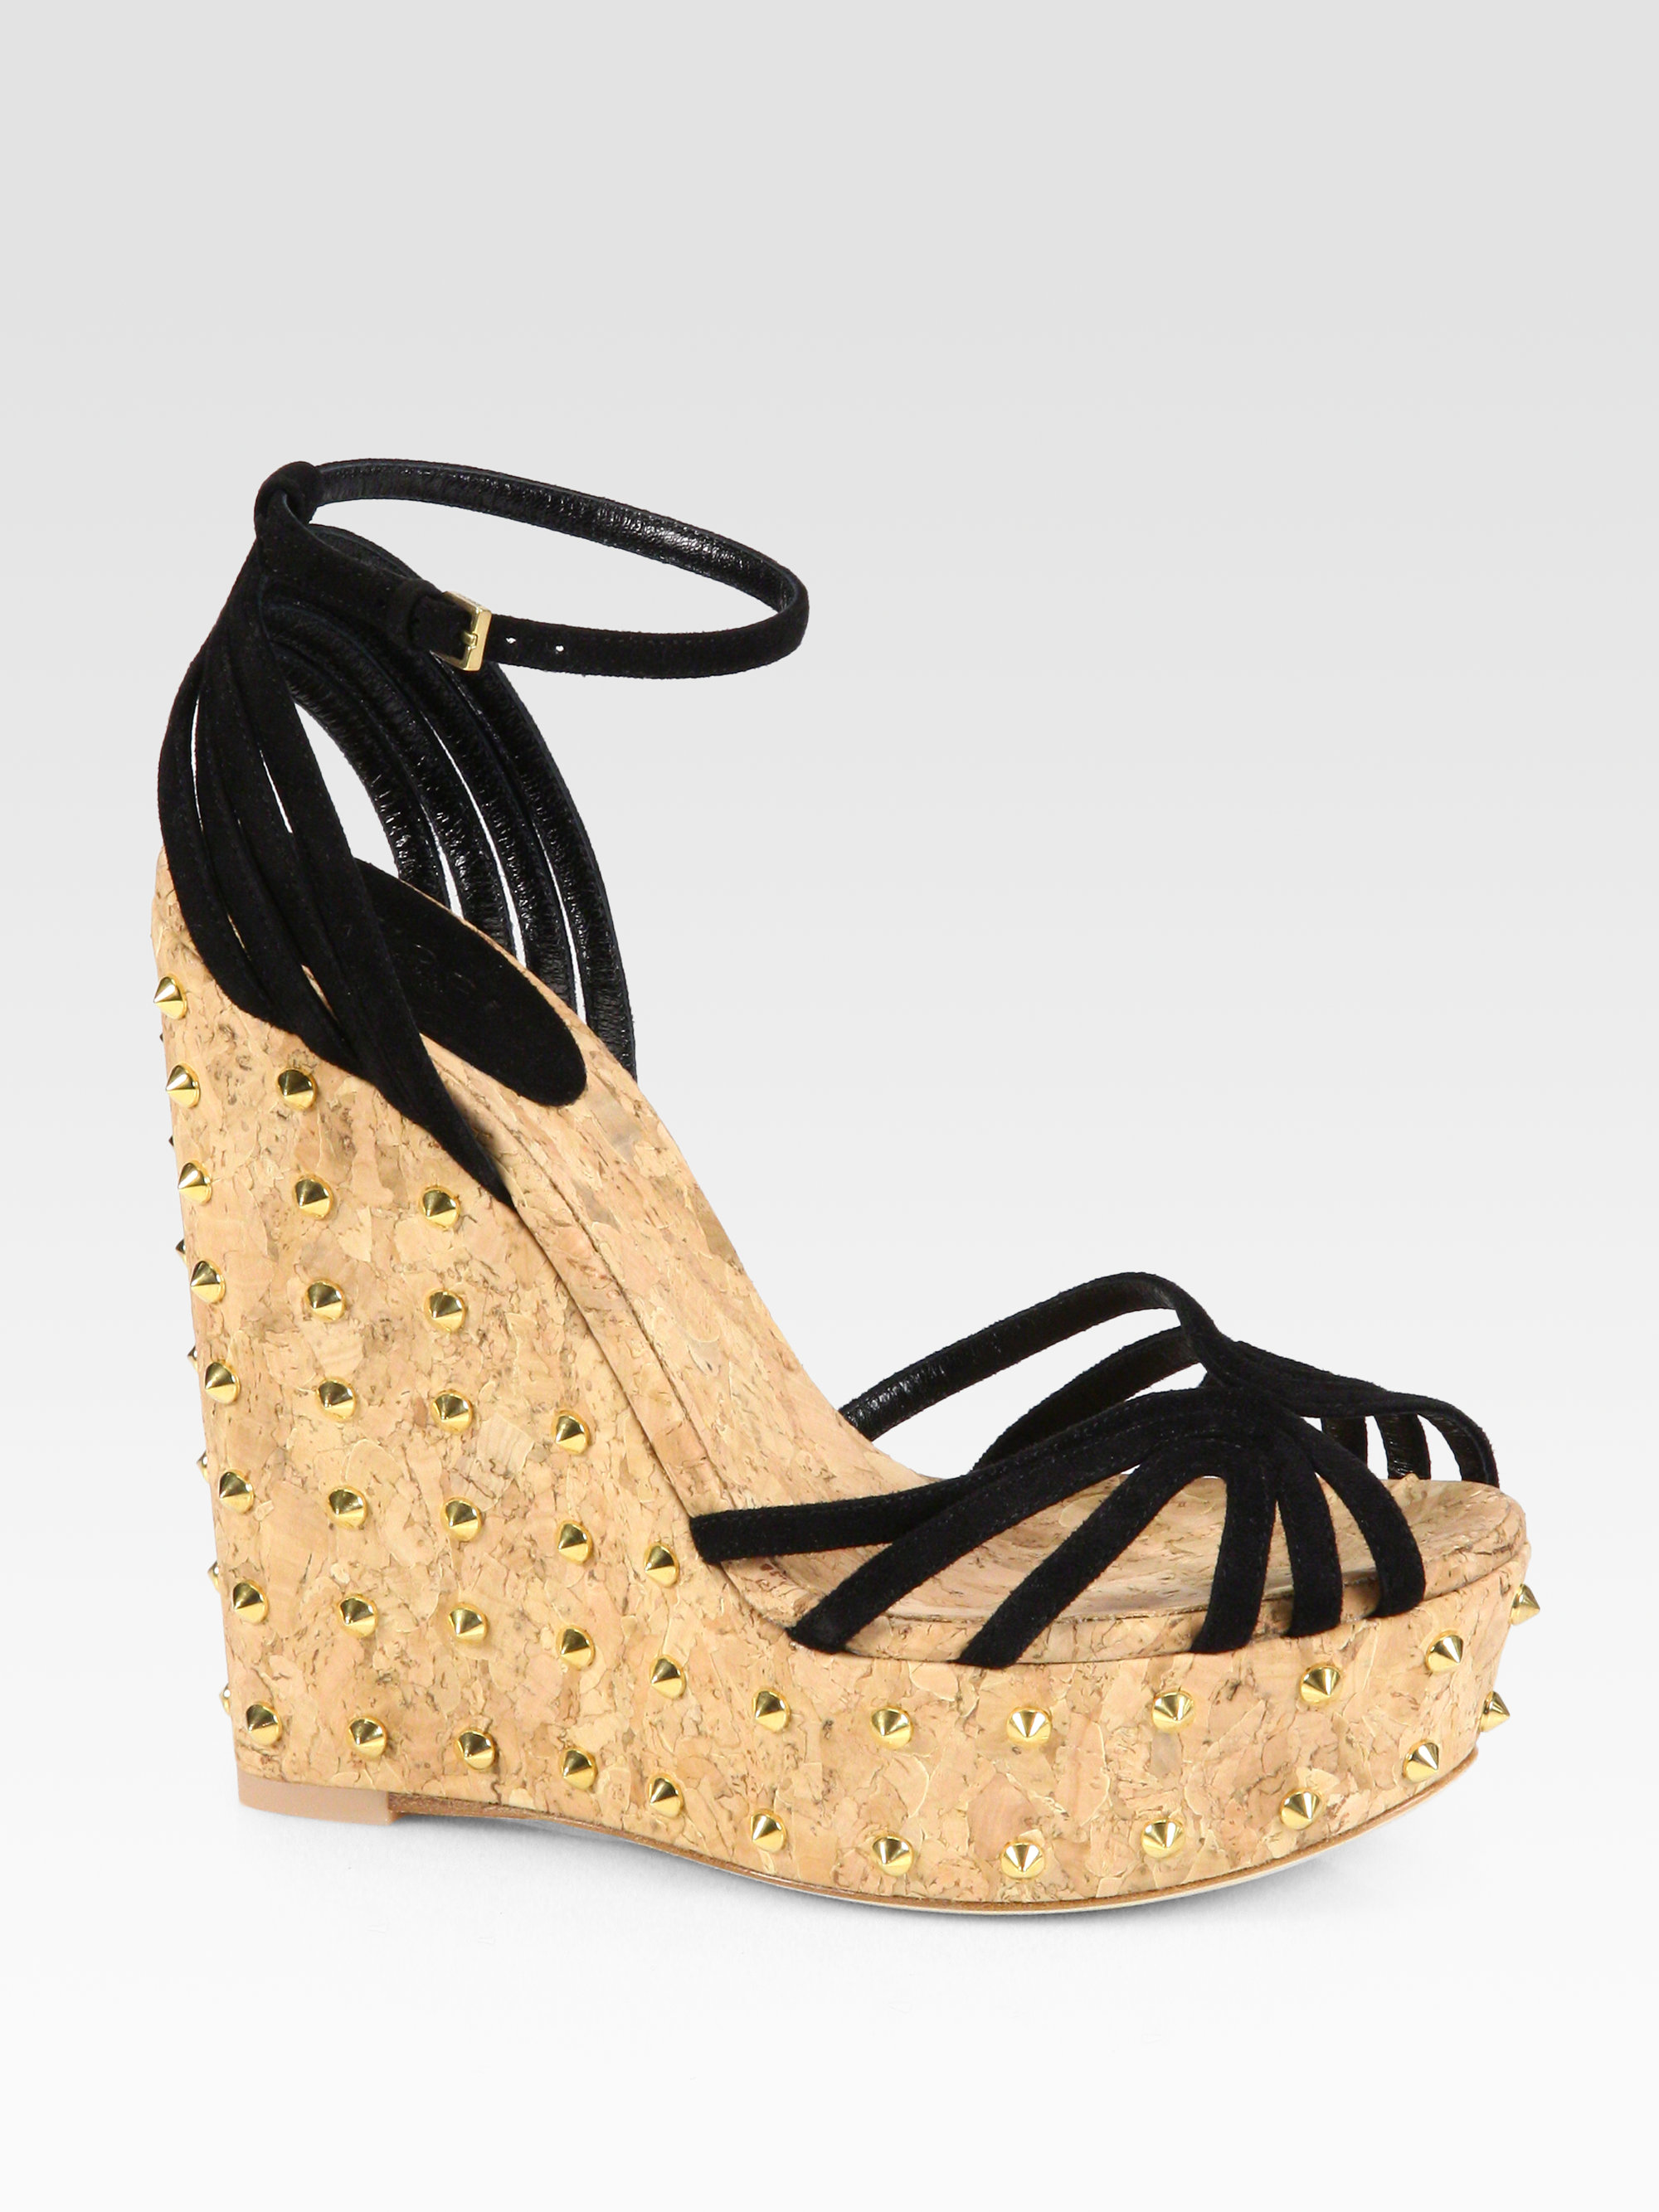 Gucci Suede Studded Cork Wedge Sandals in Black | Lyst